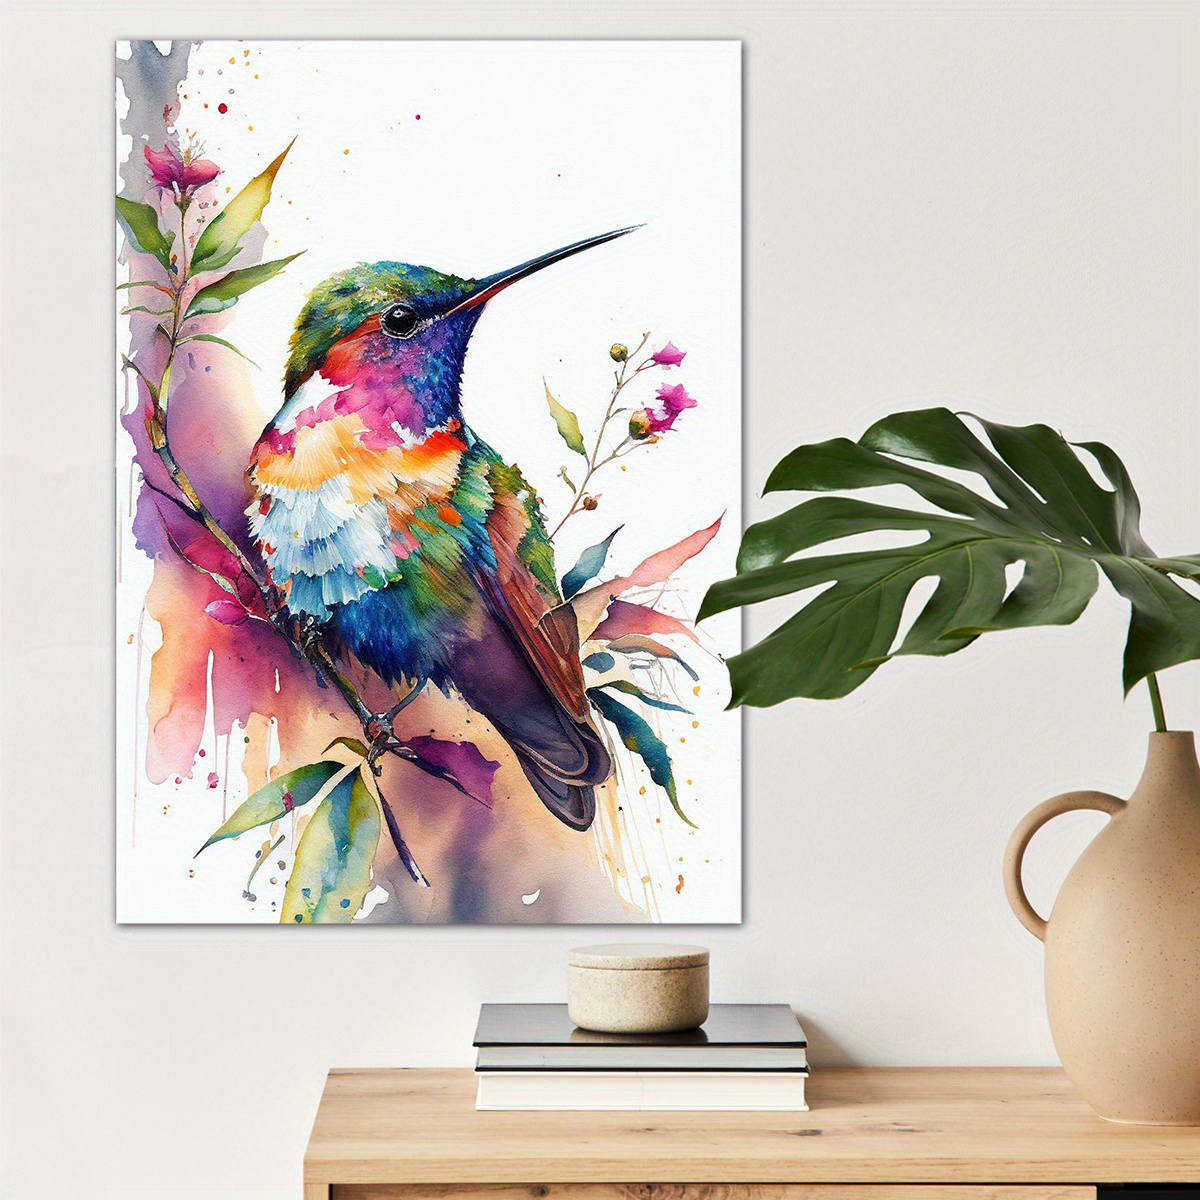 

1pc Watercolor Hummingbird Poster Canvas Wall Art For Home Decor, Bird Poster Wall Decor High Quality Canvas Prints For Living Room Bedroom Kitchen Office Cafe Decor, Perfect Gift And Decoration